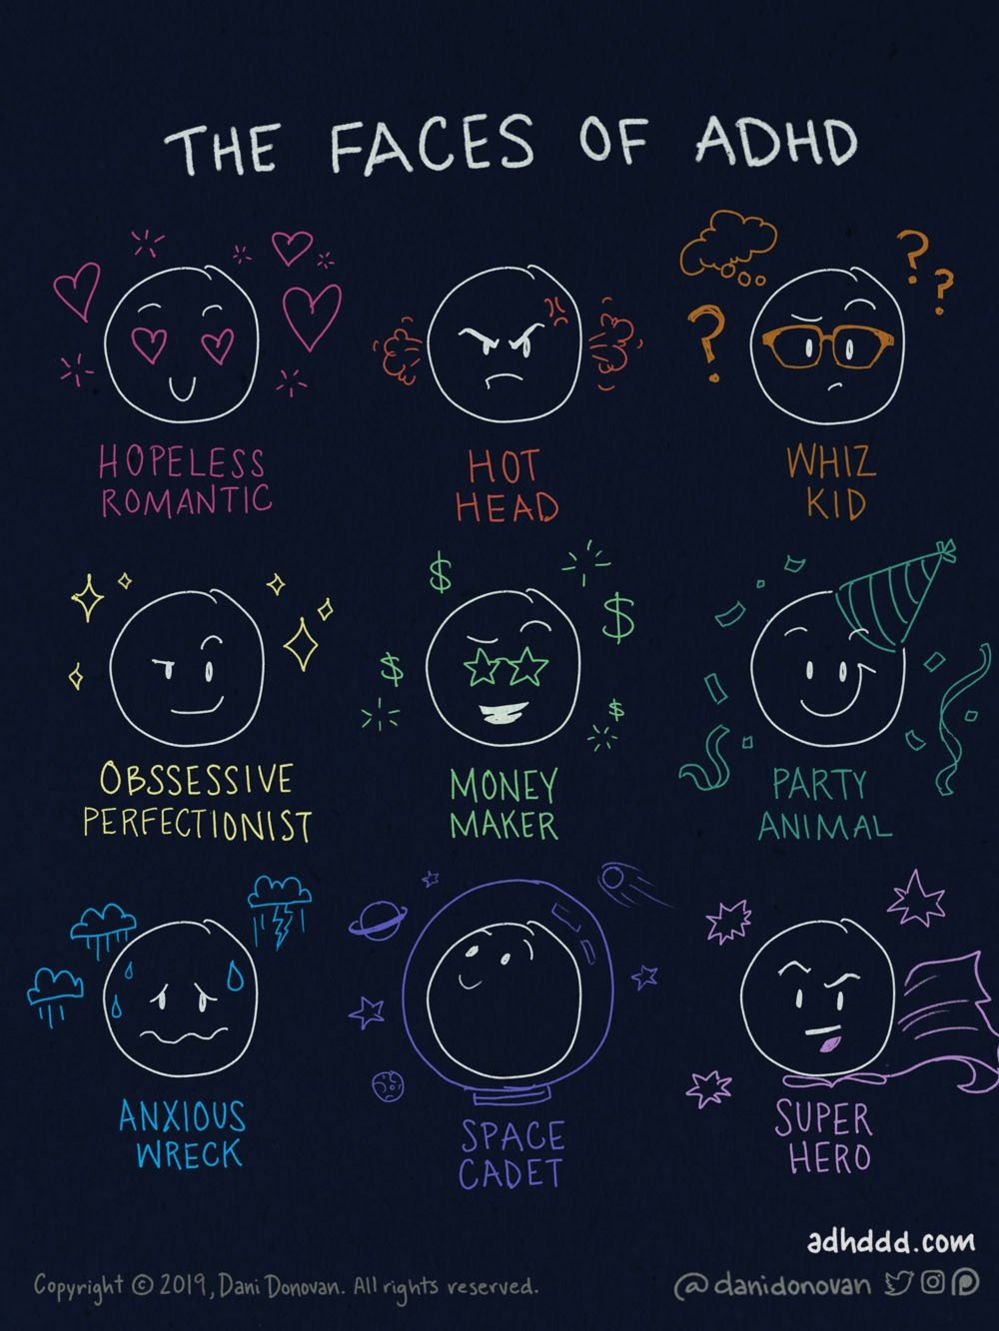 The faces of ADHD. Dani has doodled faces representing different personalities. These are 'hopeless romantic', 'hot head', 'whiz kid', 'obsessive perfectionist', 'money maker', 'party animal', 'anxious wreck', 'space cadet' and 'super hero'.